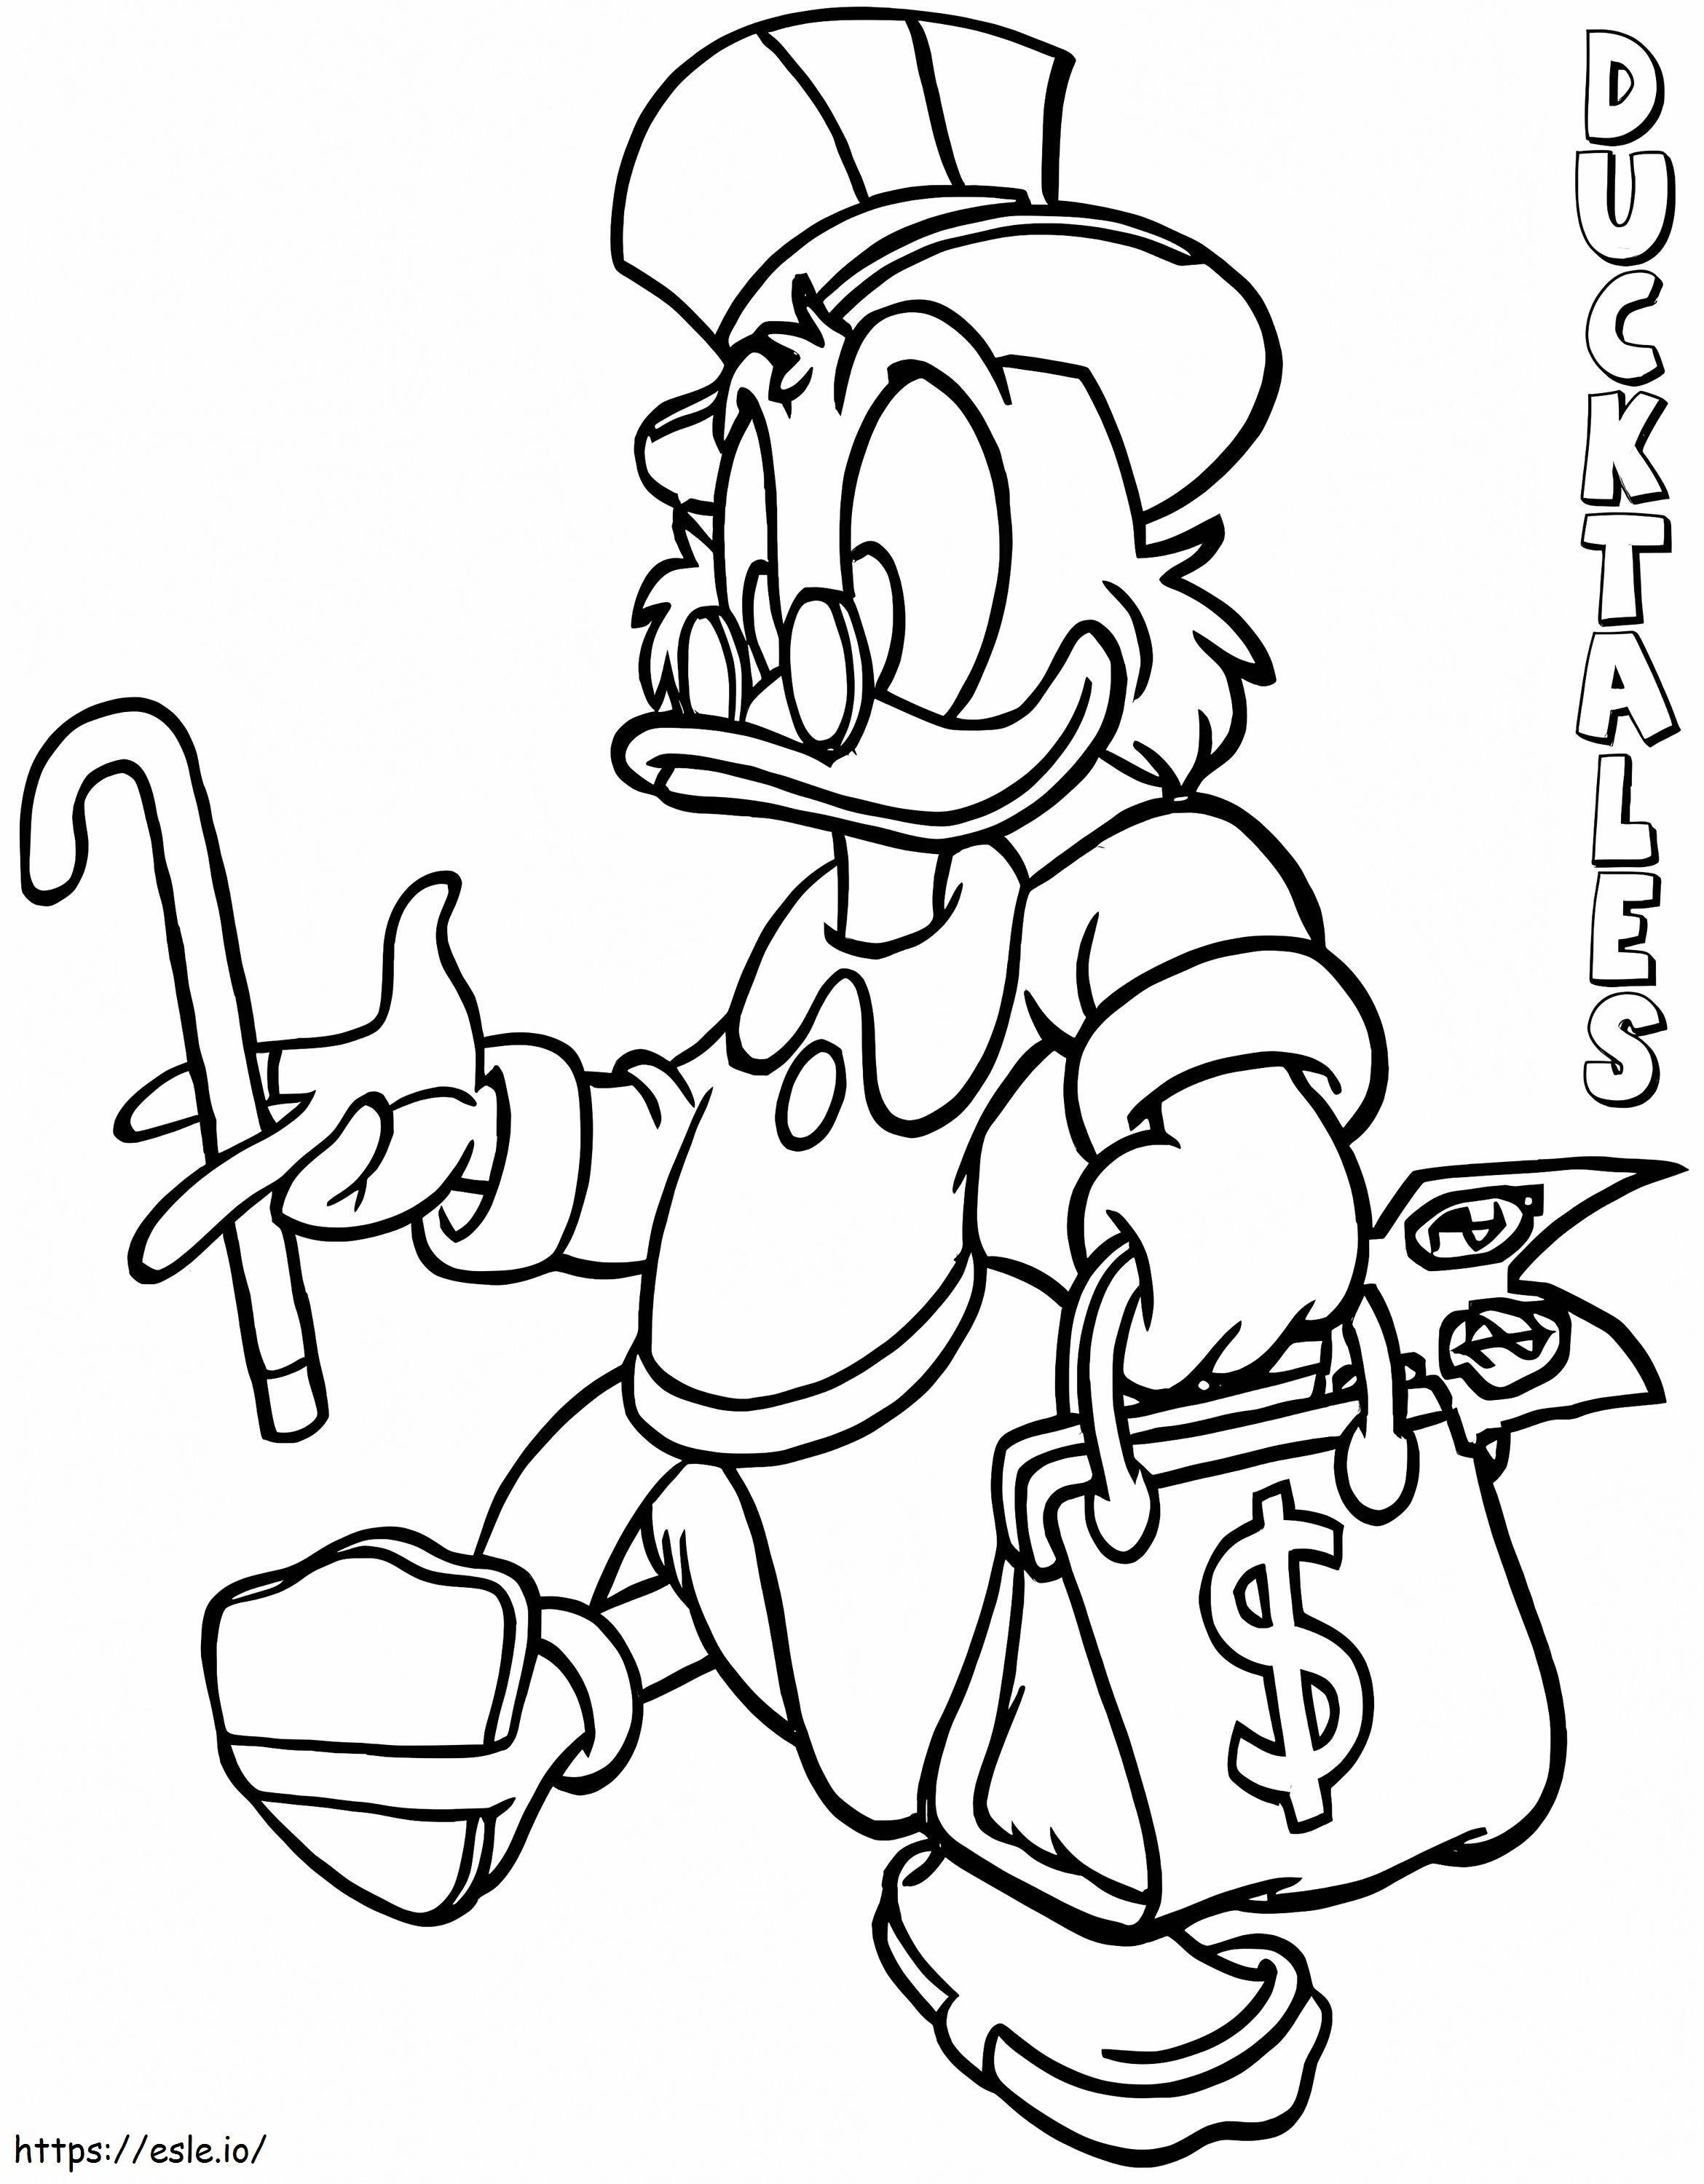 Scrooge Mcduck And Ducktales coloring page